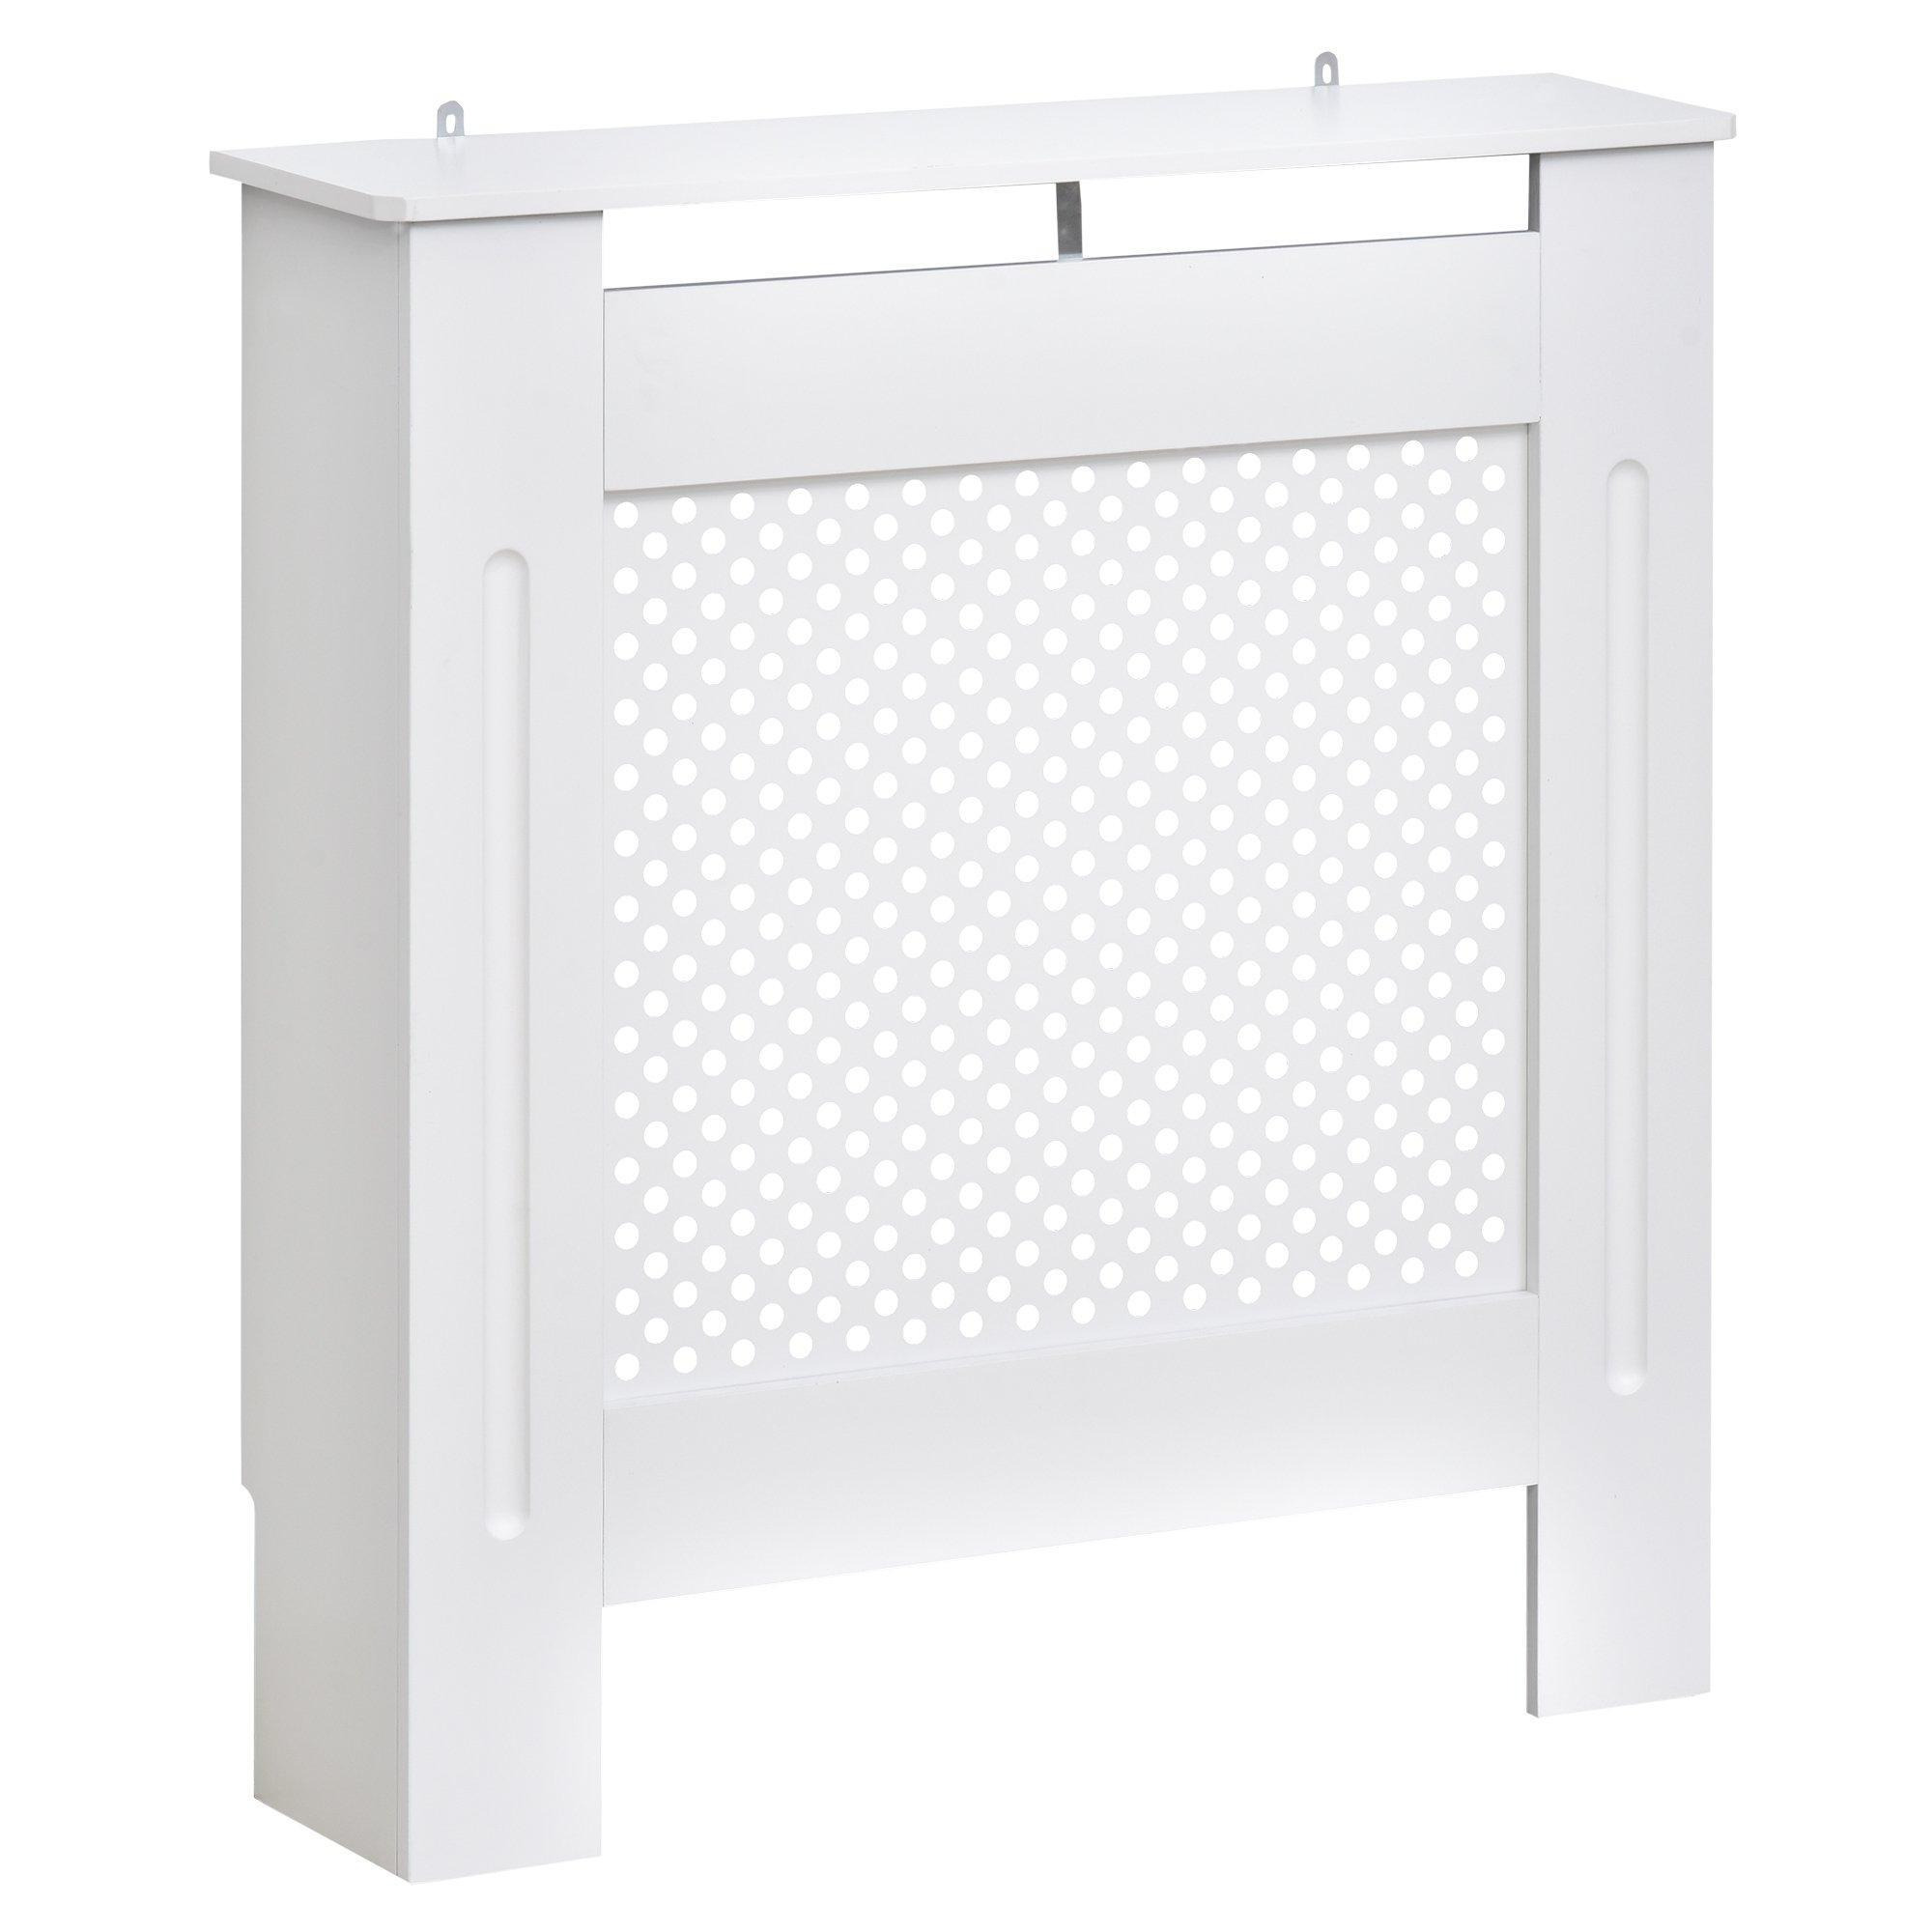 Radiator Cover White 3 Sizes Available MDF Solid Modern Home Design - image 1